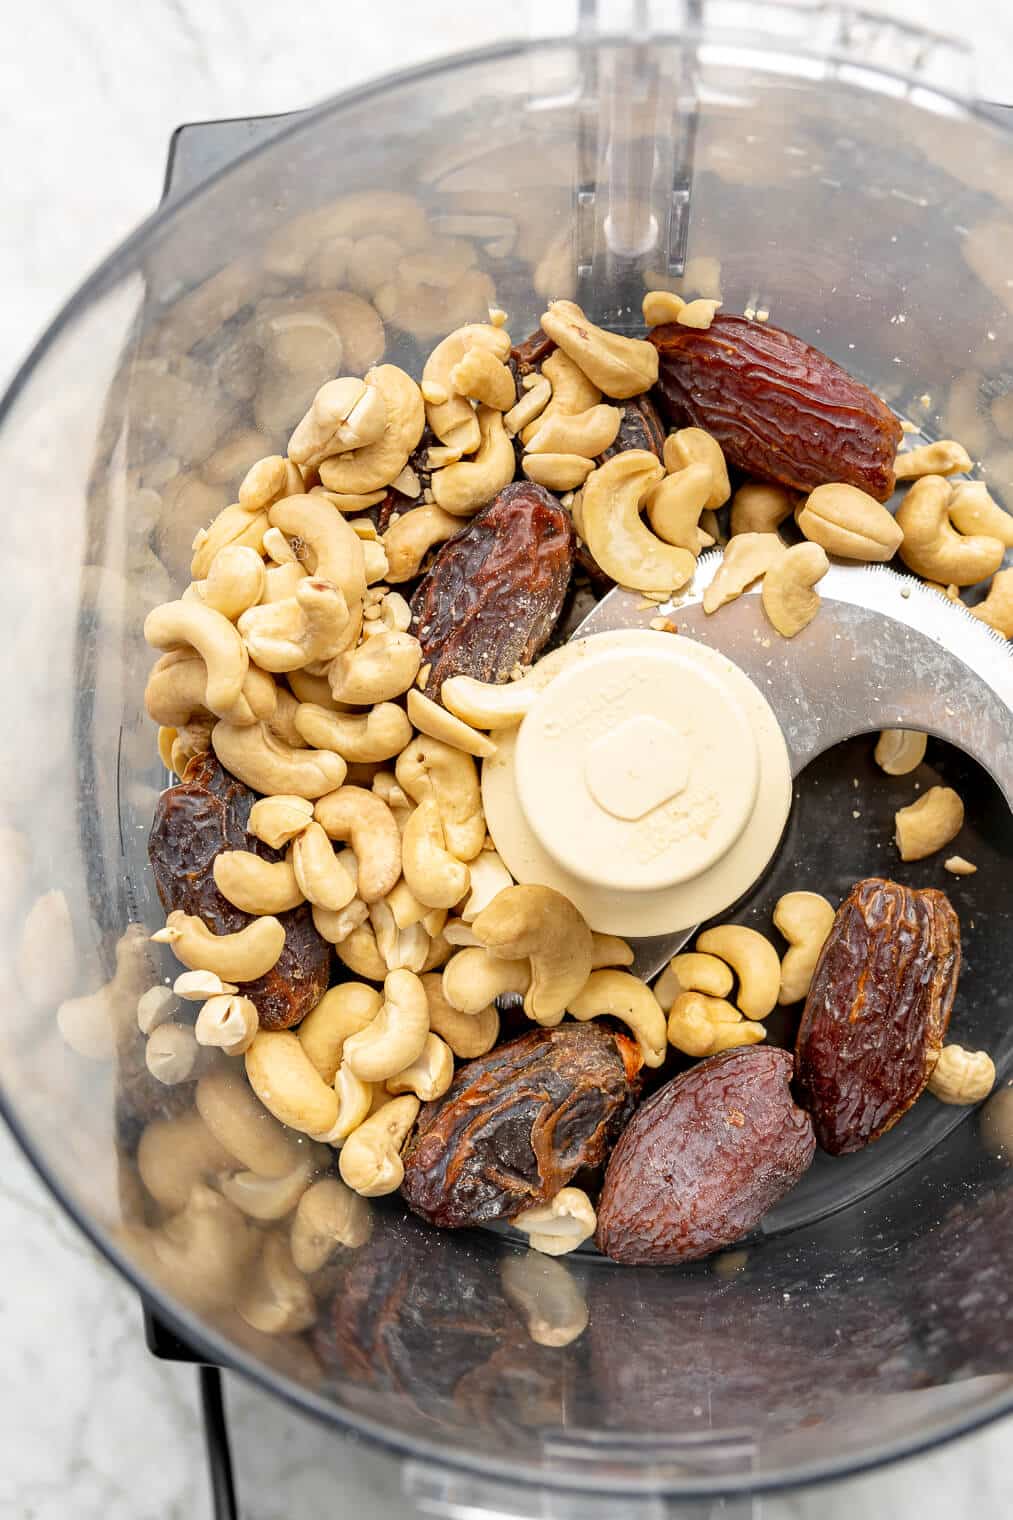 Cashews and dates in a food processor.